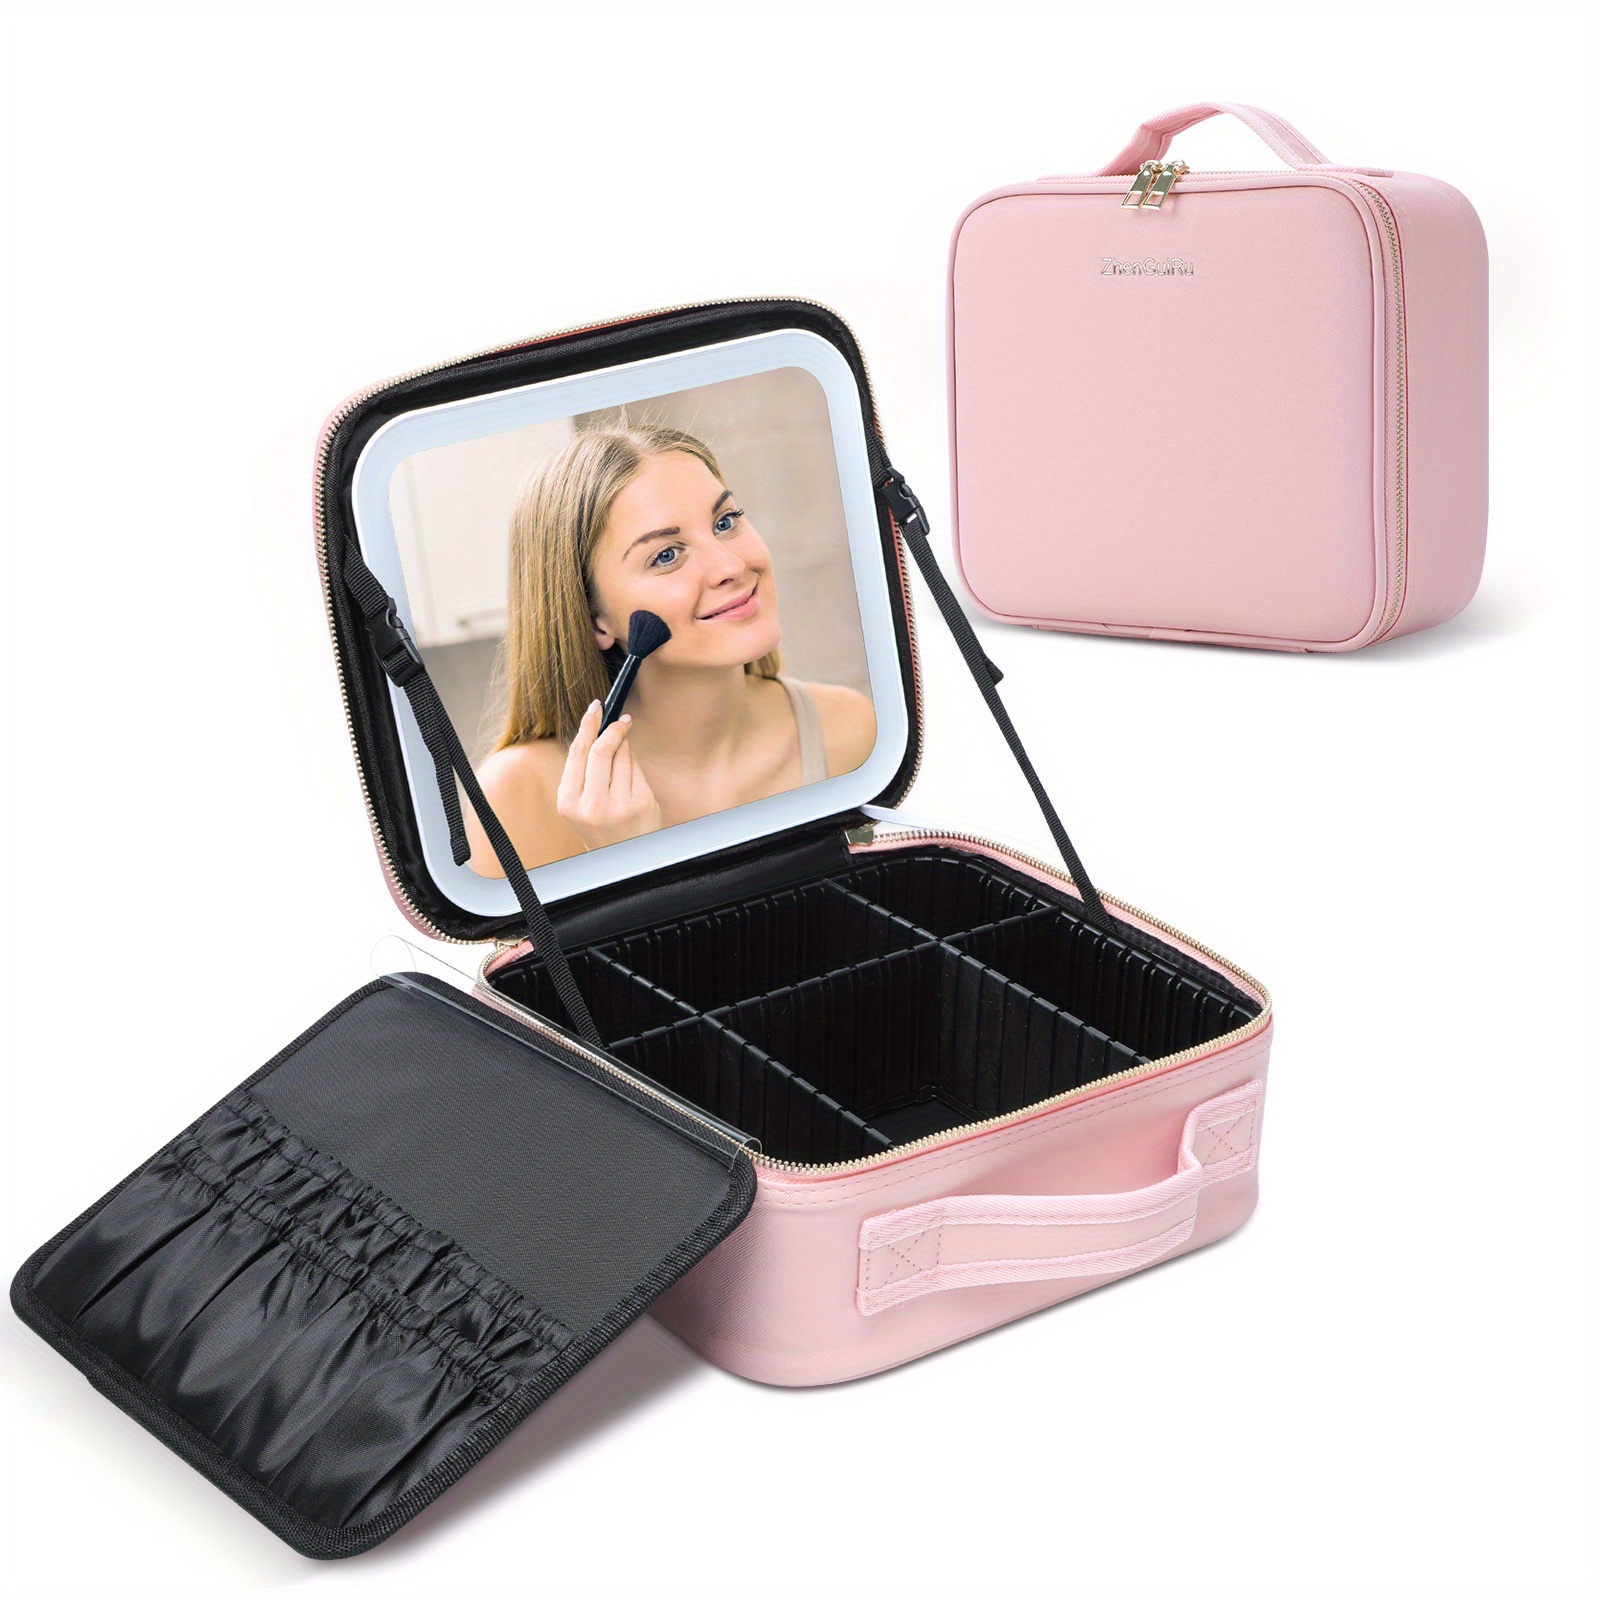 lighted makeup travel train case with mirror led light 3 adjustable brightness cosmetic bag portable storage adjustable partition waterproof toiletry bag with makeup brushes holder gift for women details 0